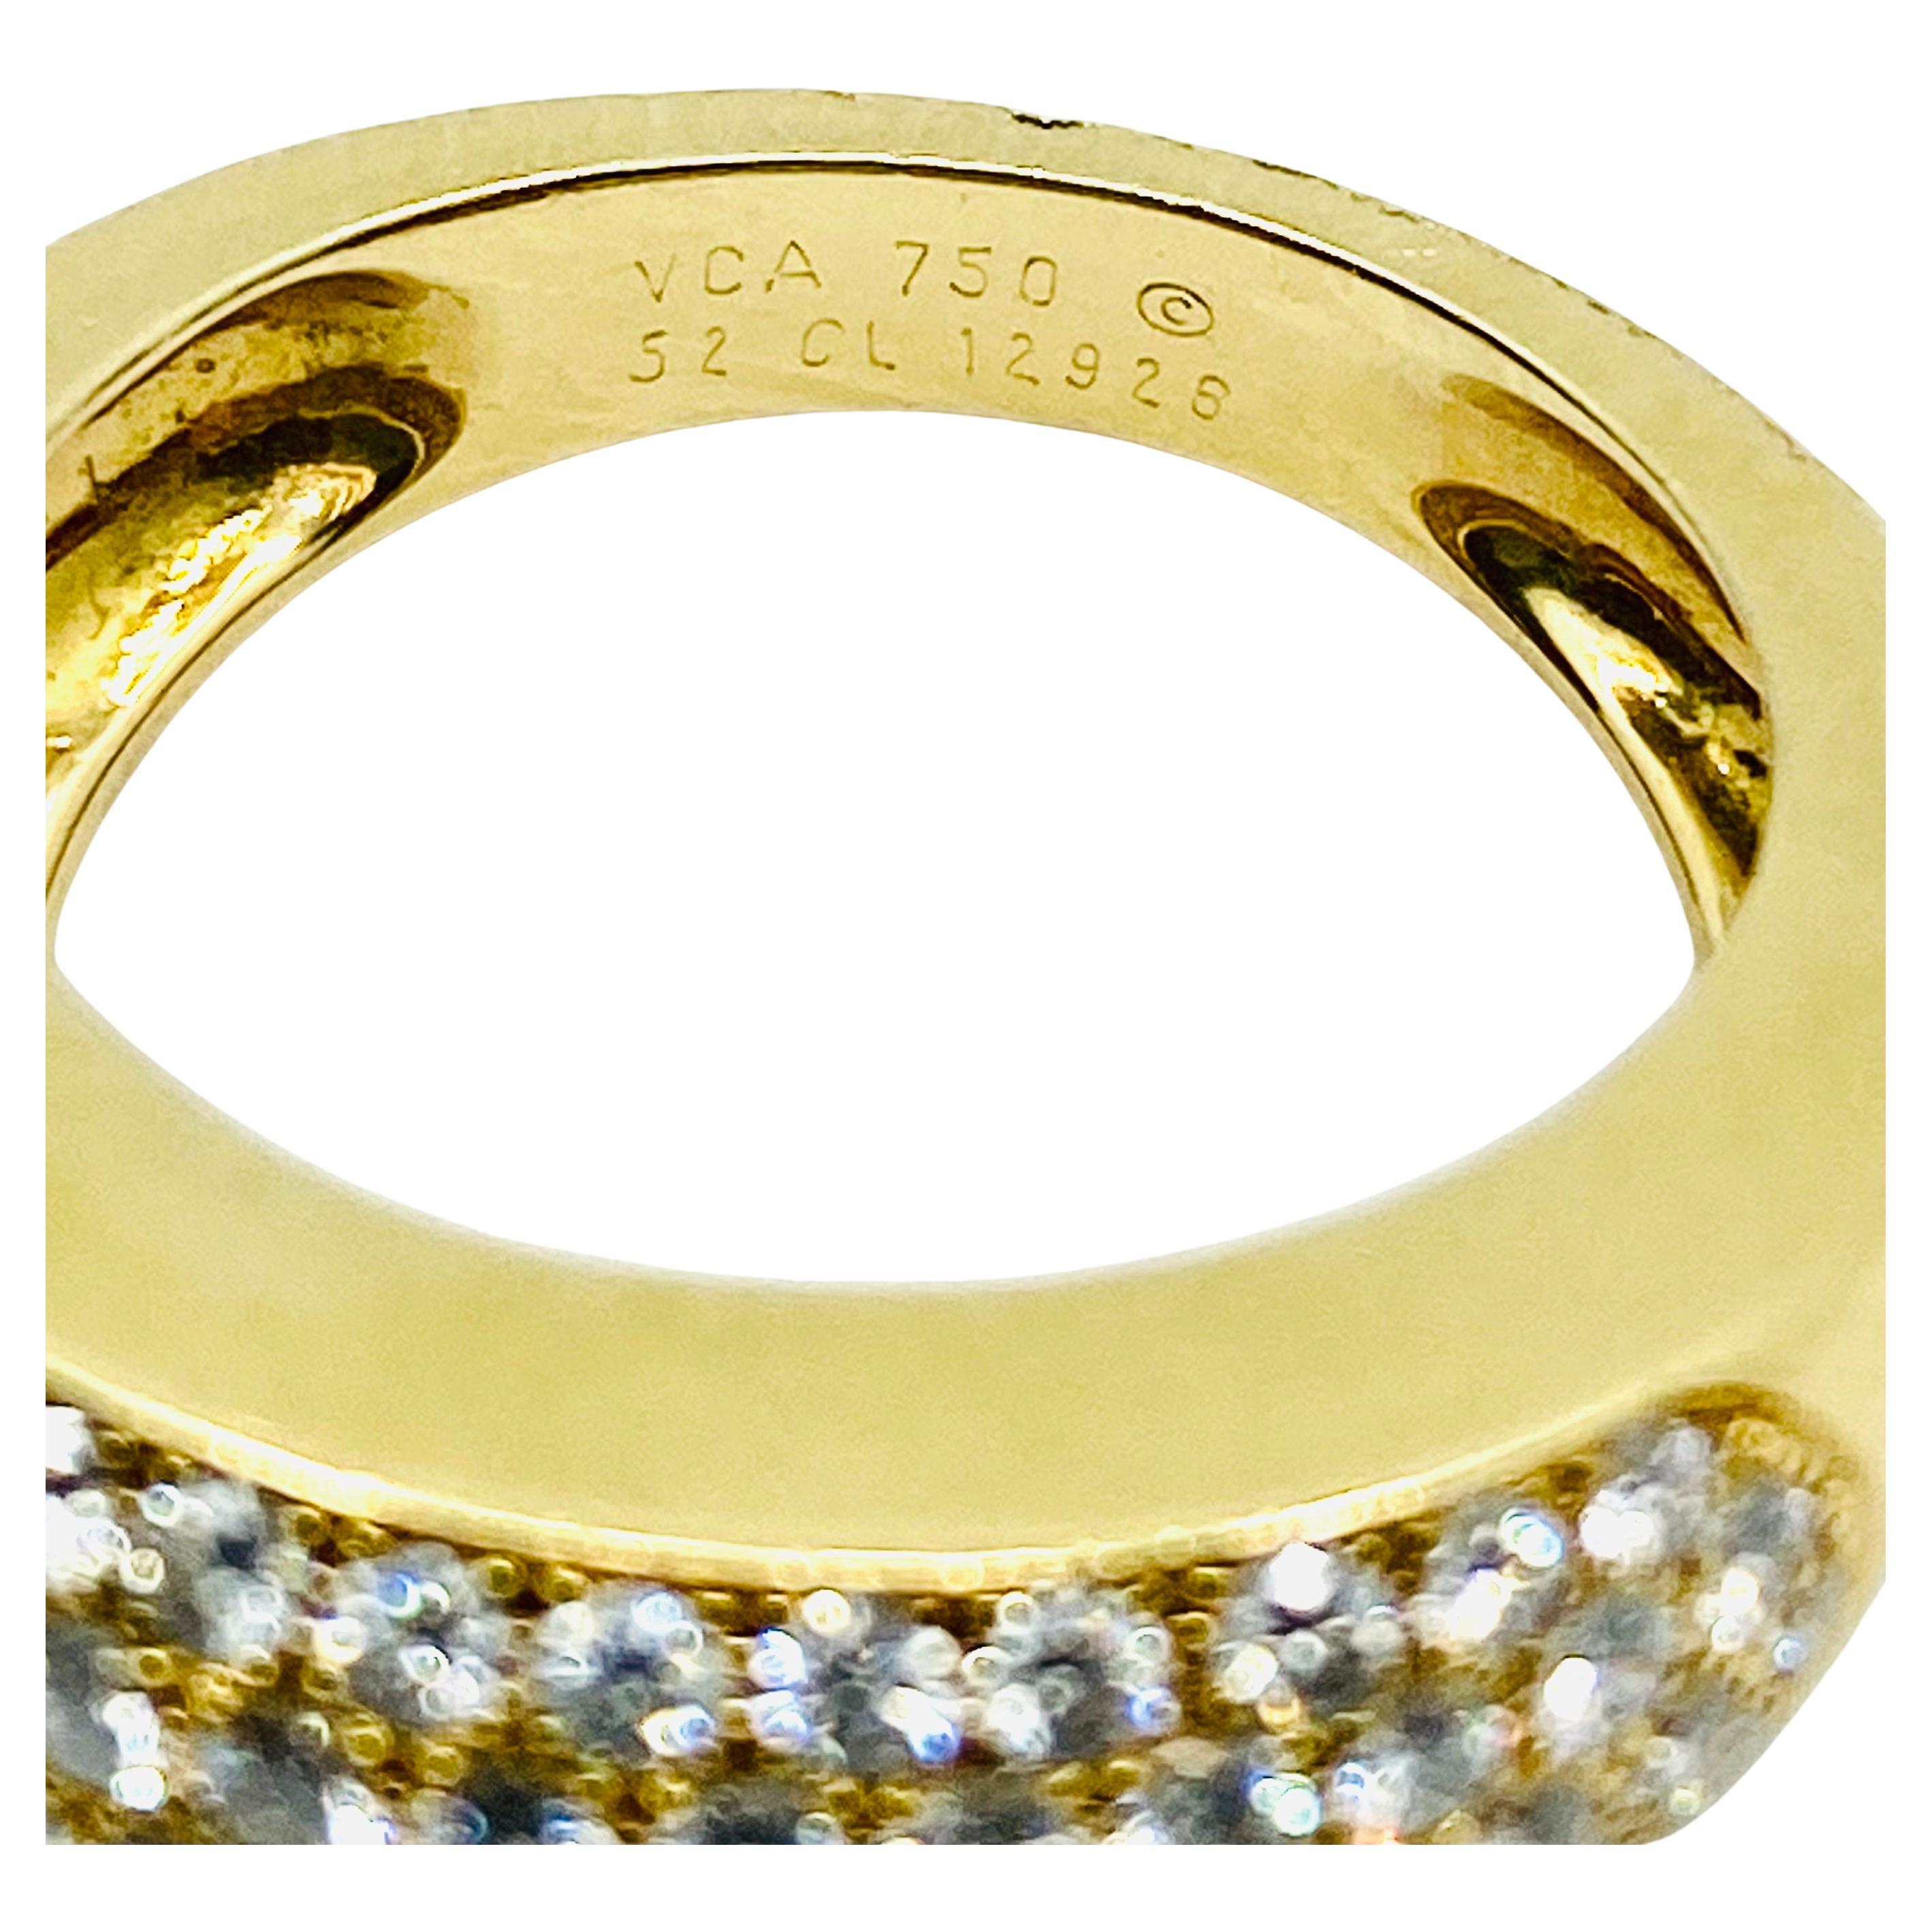 Van Cleef & Arpels Pave Diamond Gold Dome Ring For Sale 4